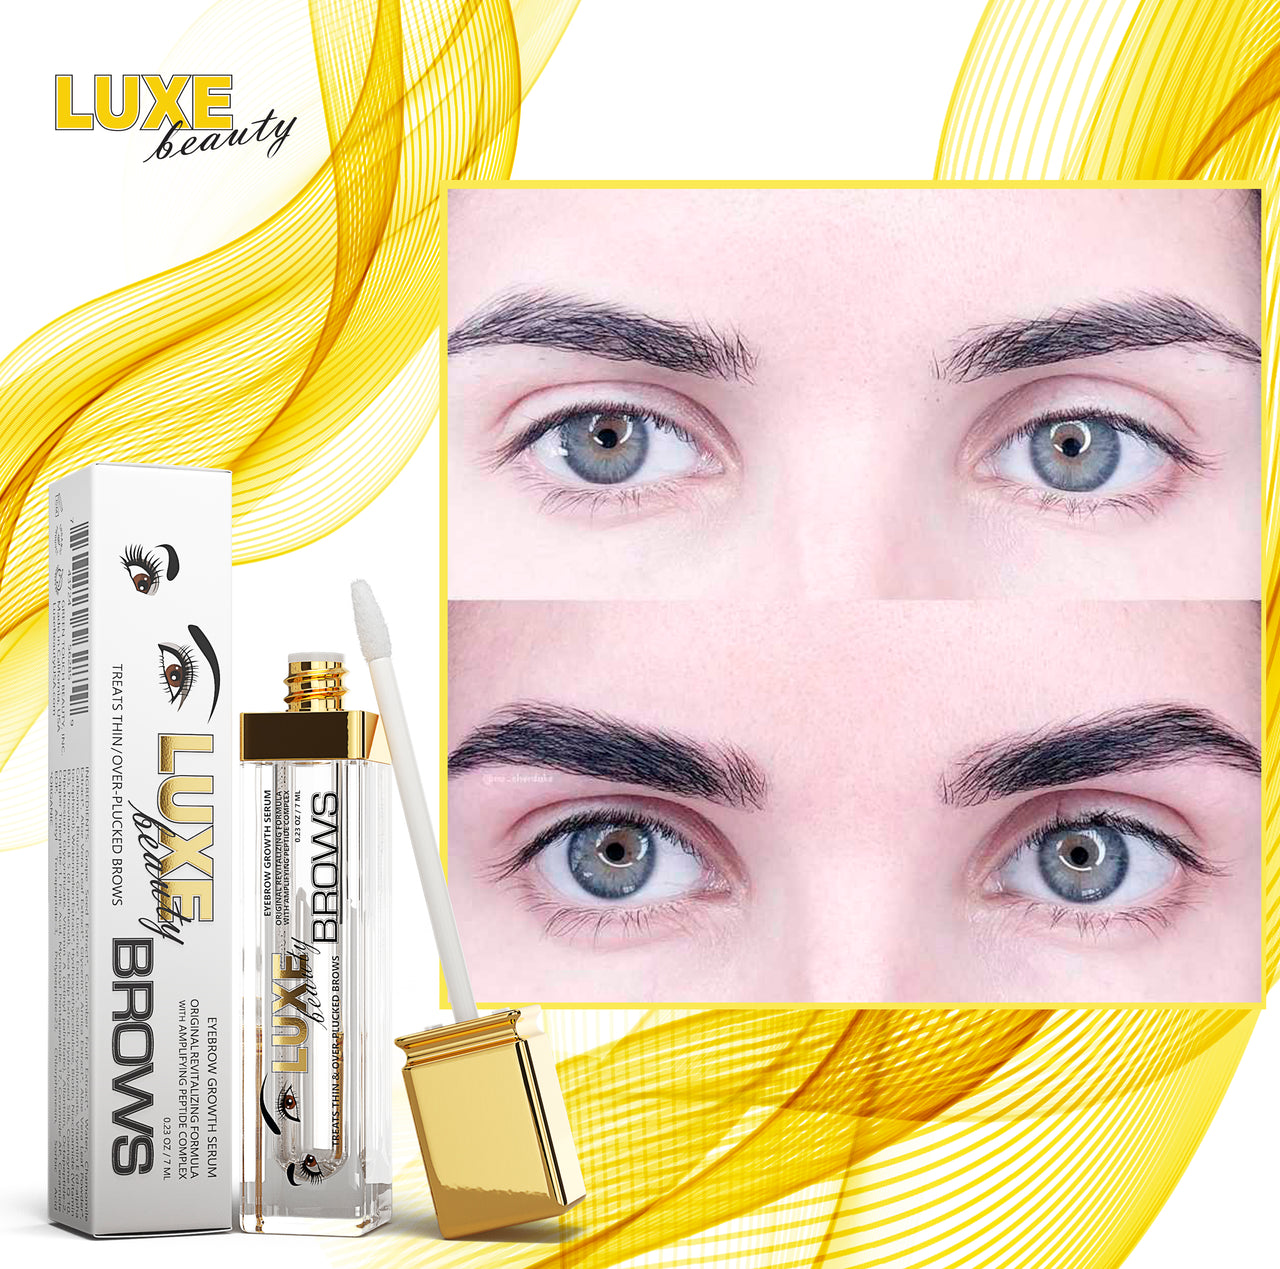 LUXE BEAUTY BROWS™ Advanced Formula Treats Thinning Over-Plucked Eyebrows